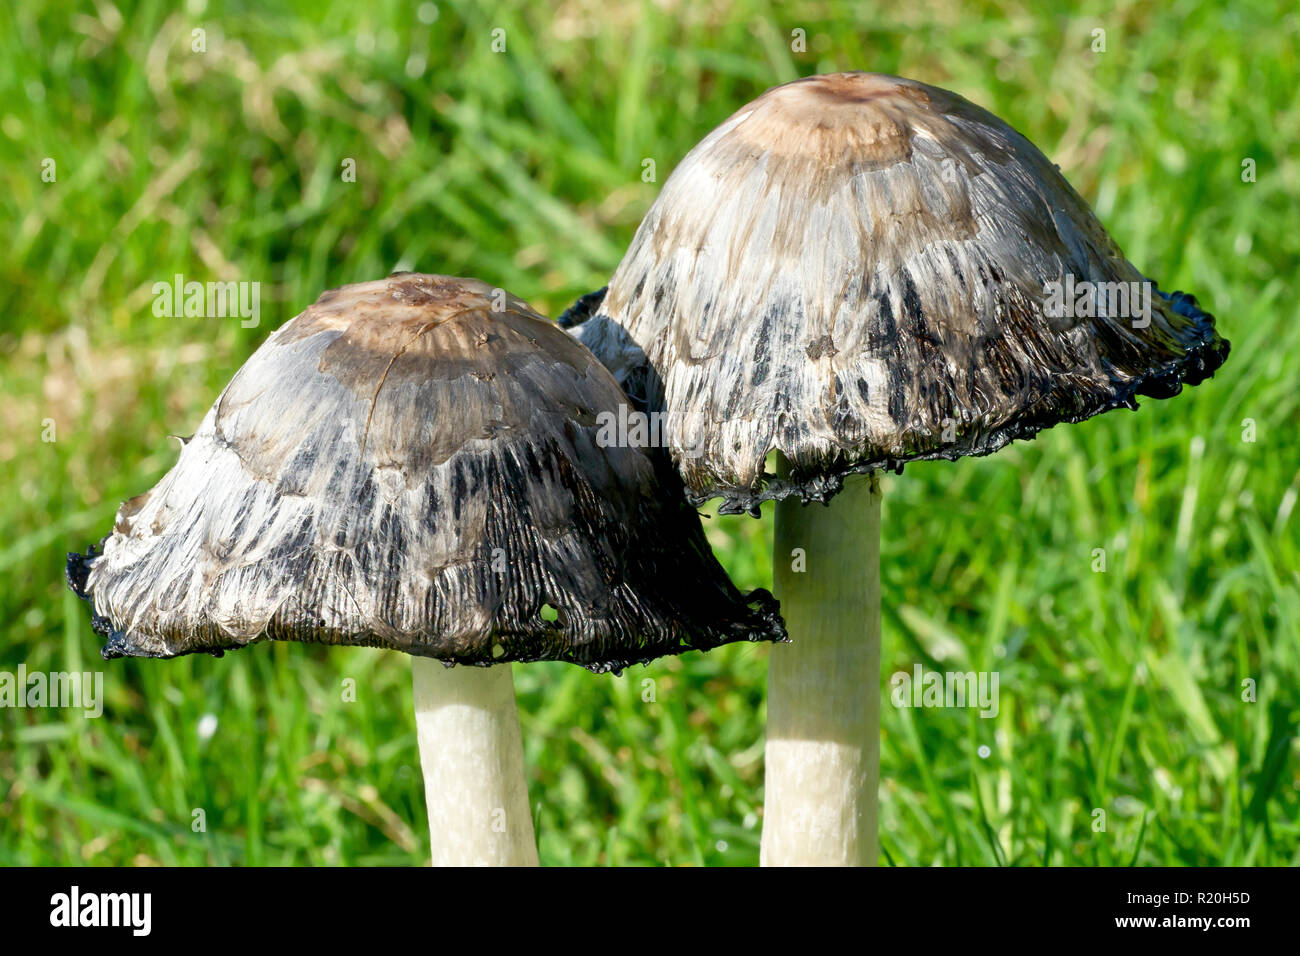 Shaggy Caps, Shaggy Inkcaps or Lawyer's Wig (coprinus comatus), close up of two fruiting bodies of the fungus. Stock Photo